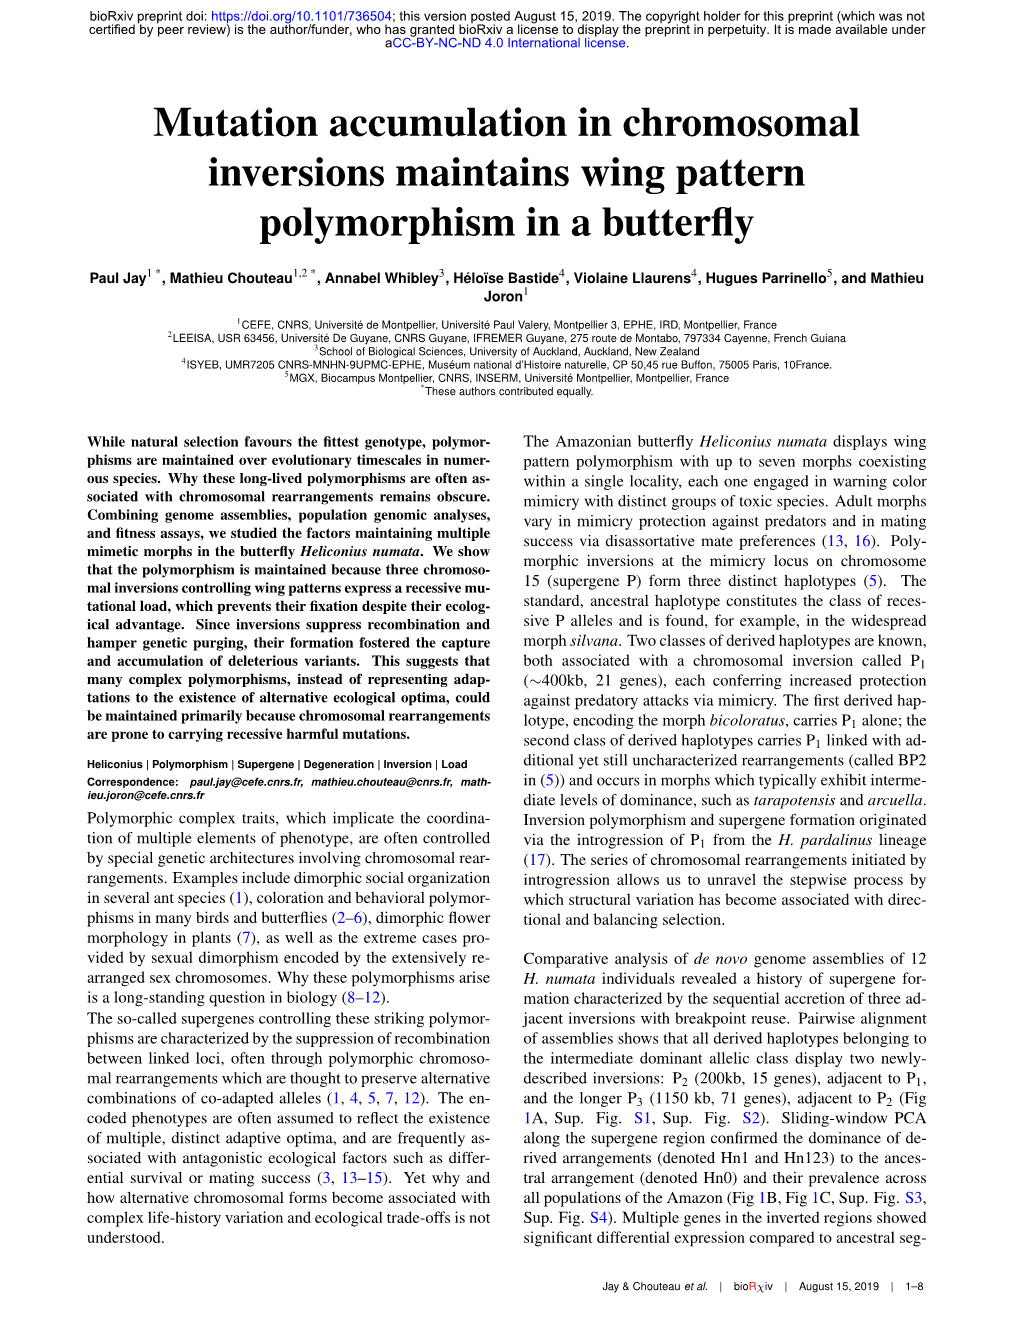 Mutation Accumulation in Chromosomal Inversions Maintains Wing Pattern Polymorphism in a Butterﬂy